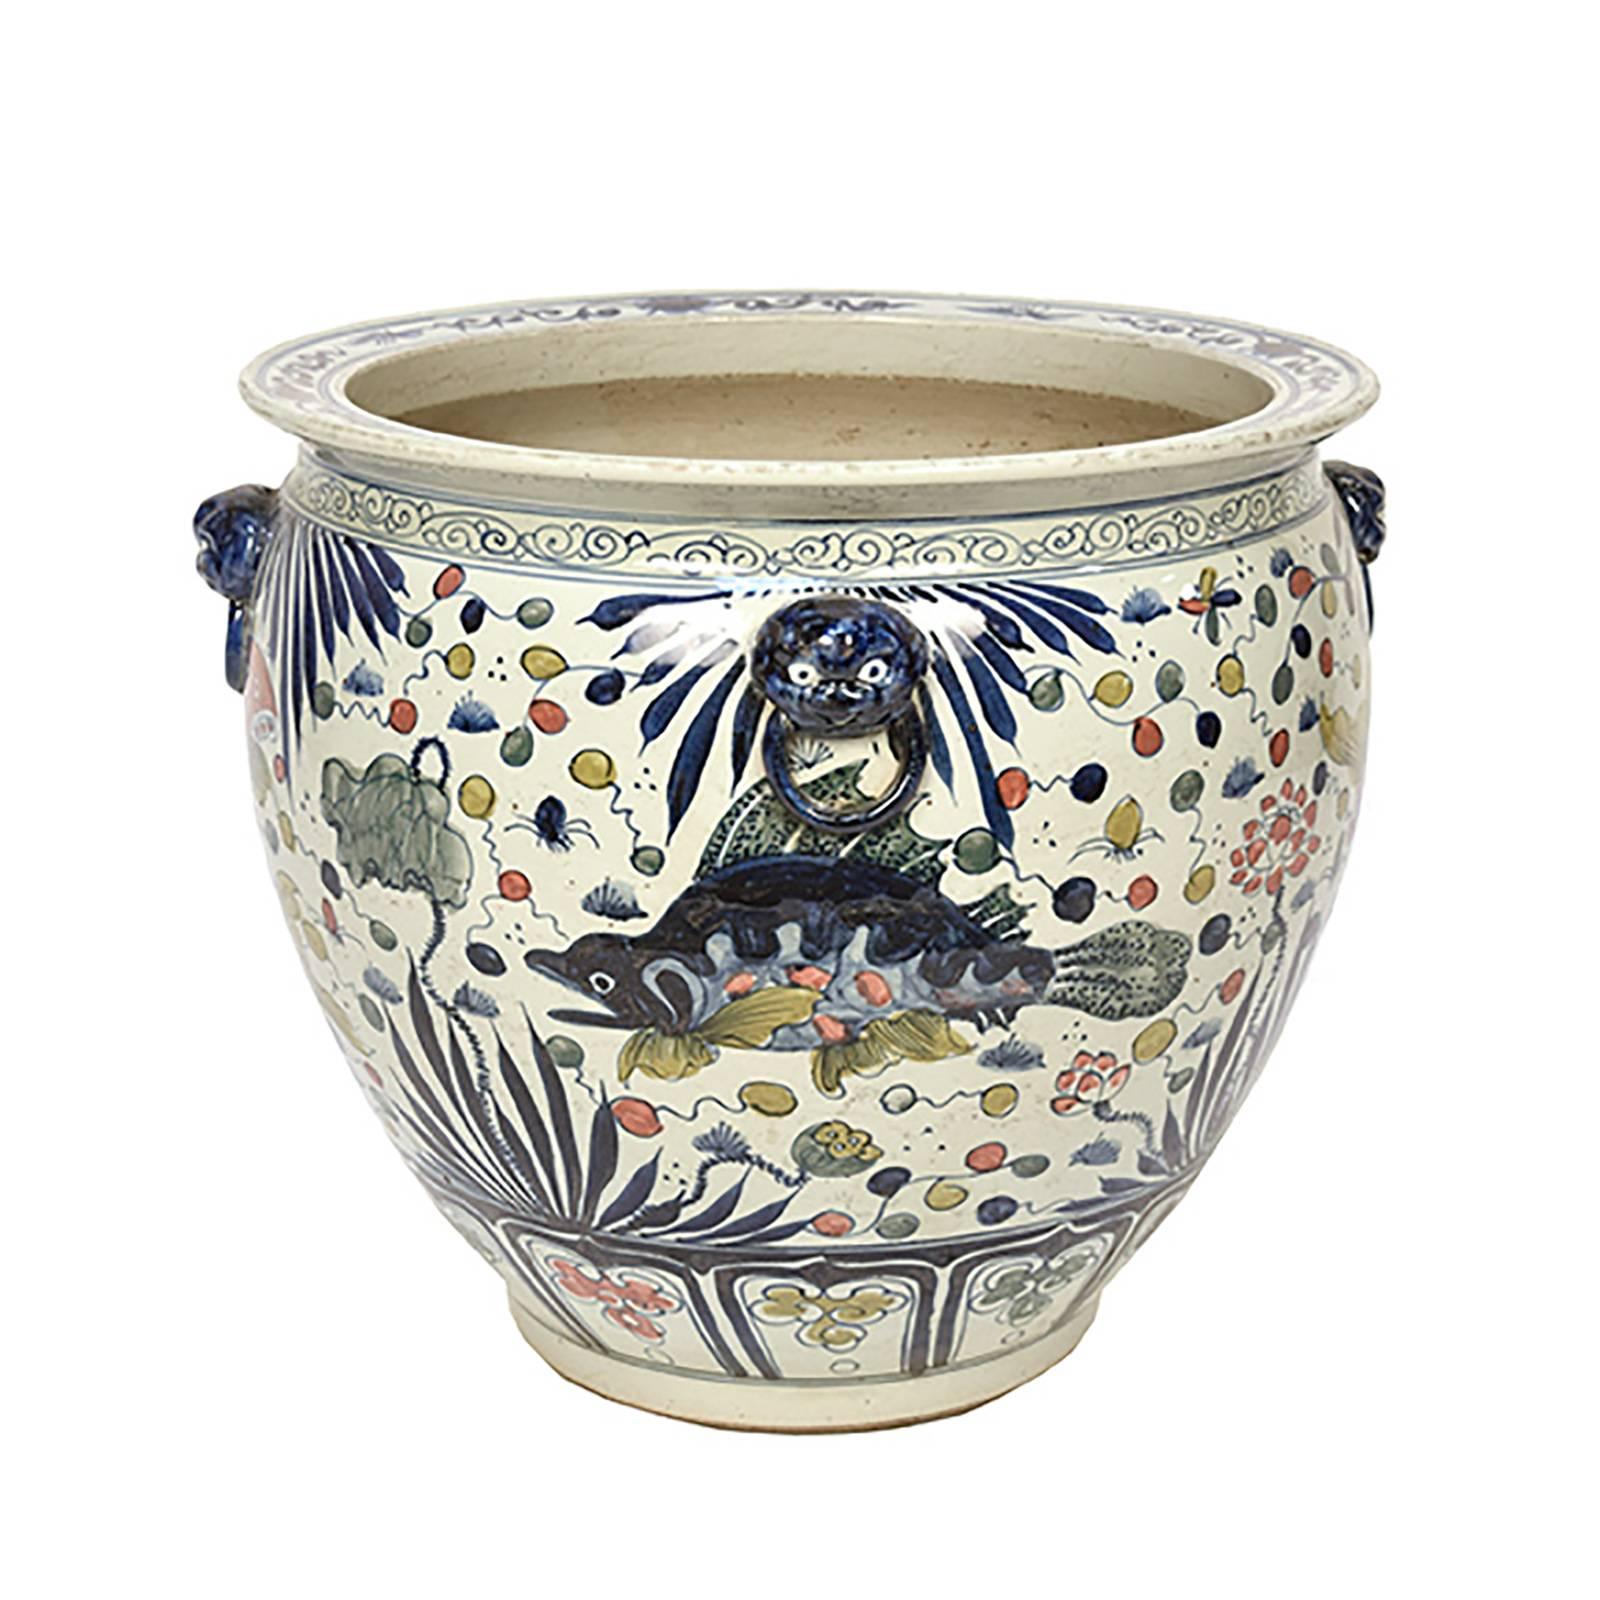 The painterly fish and flora of the sea on this basin are traditional symbols of prosperity and harmony. This vessel deviates from others in our collection with its spectrum of color and paired fish. Double fish represent unity and fidelity in